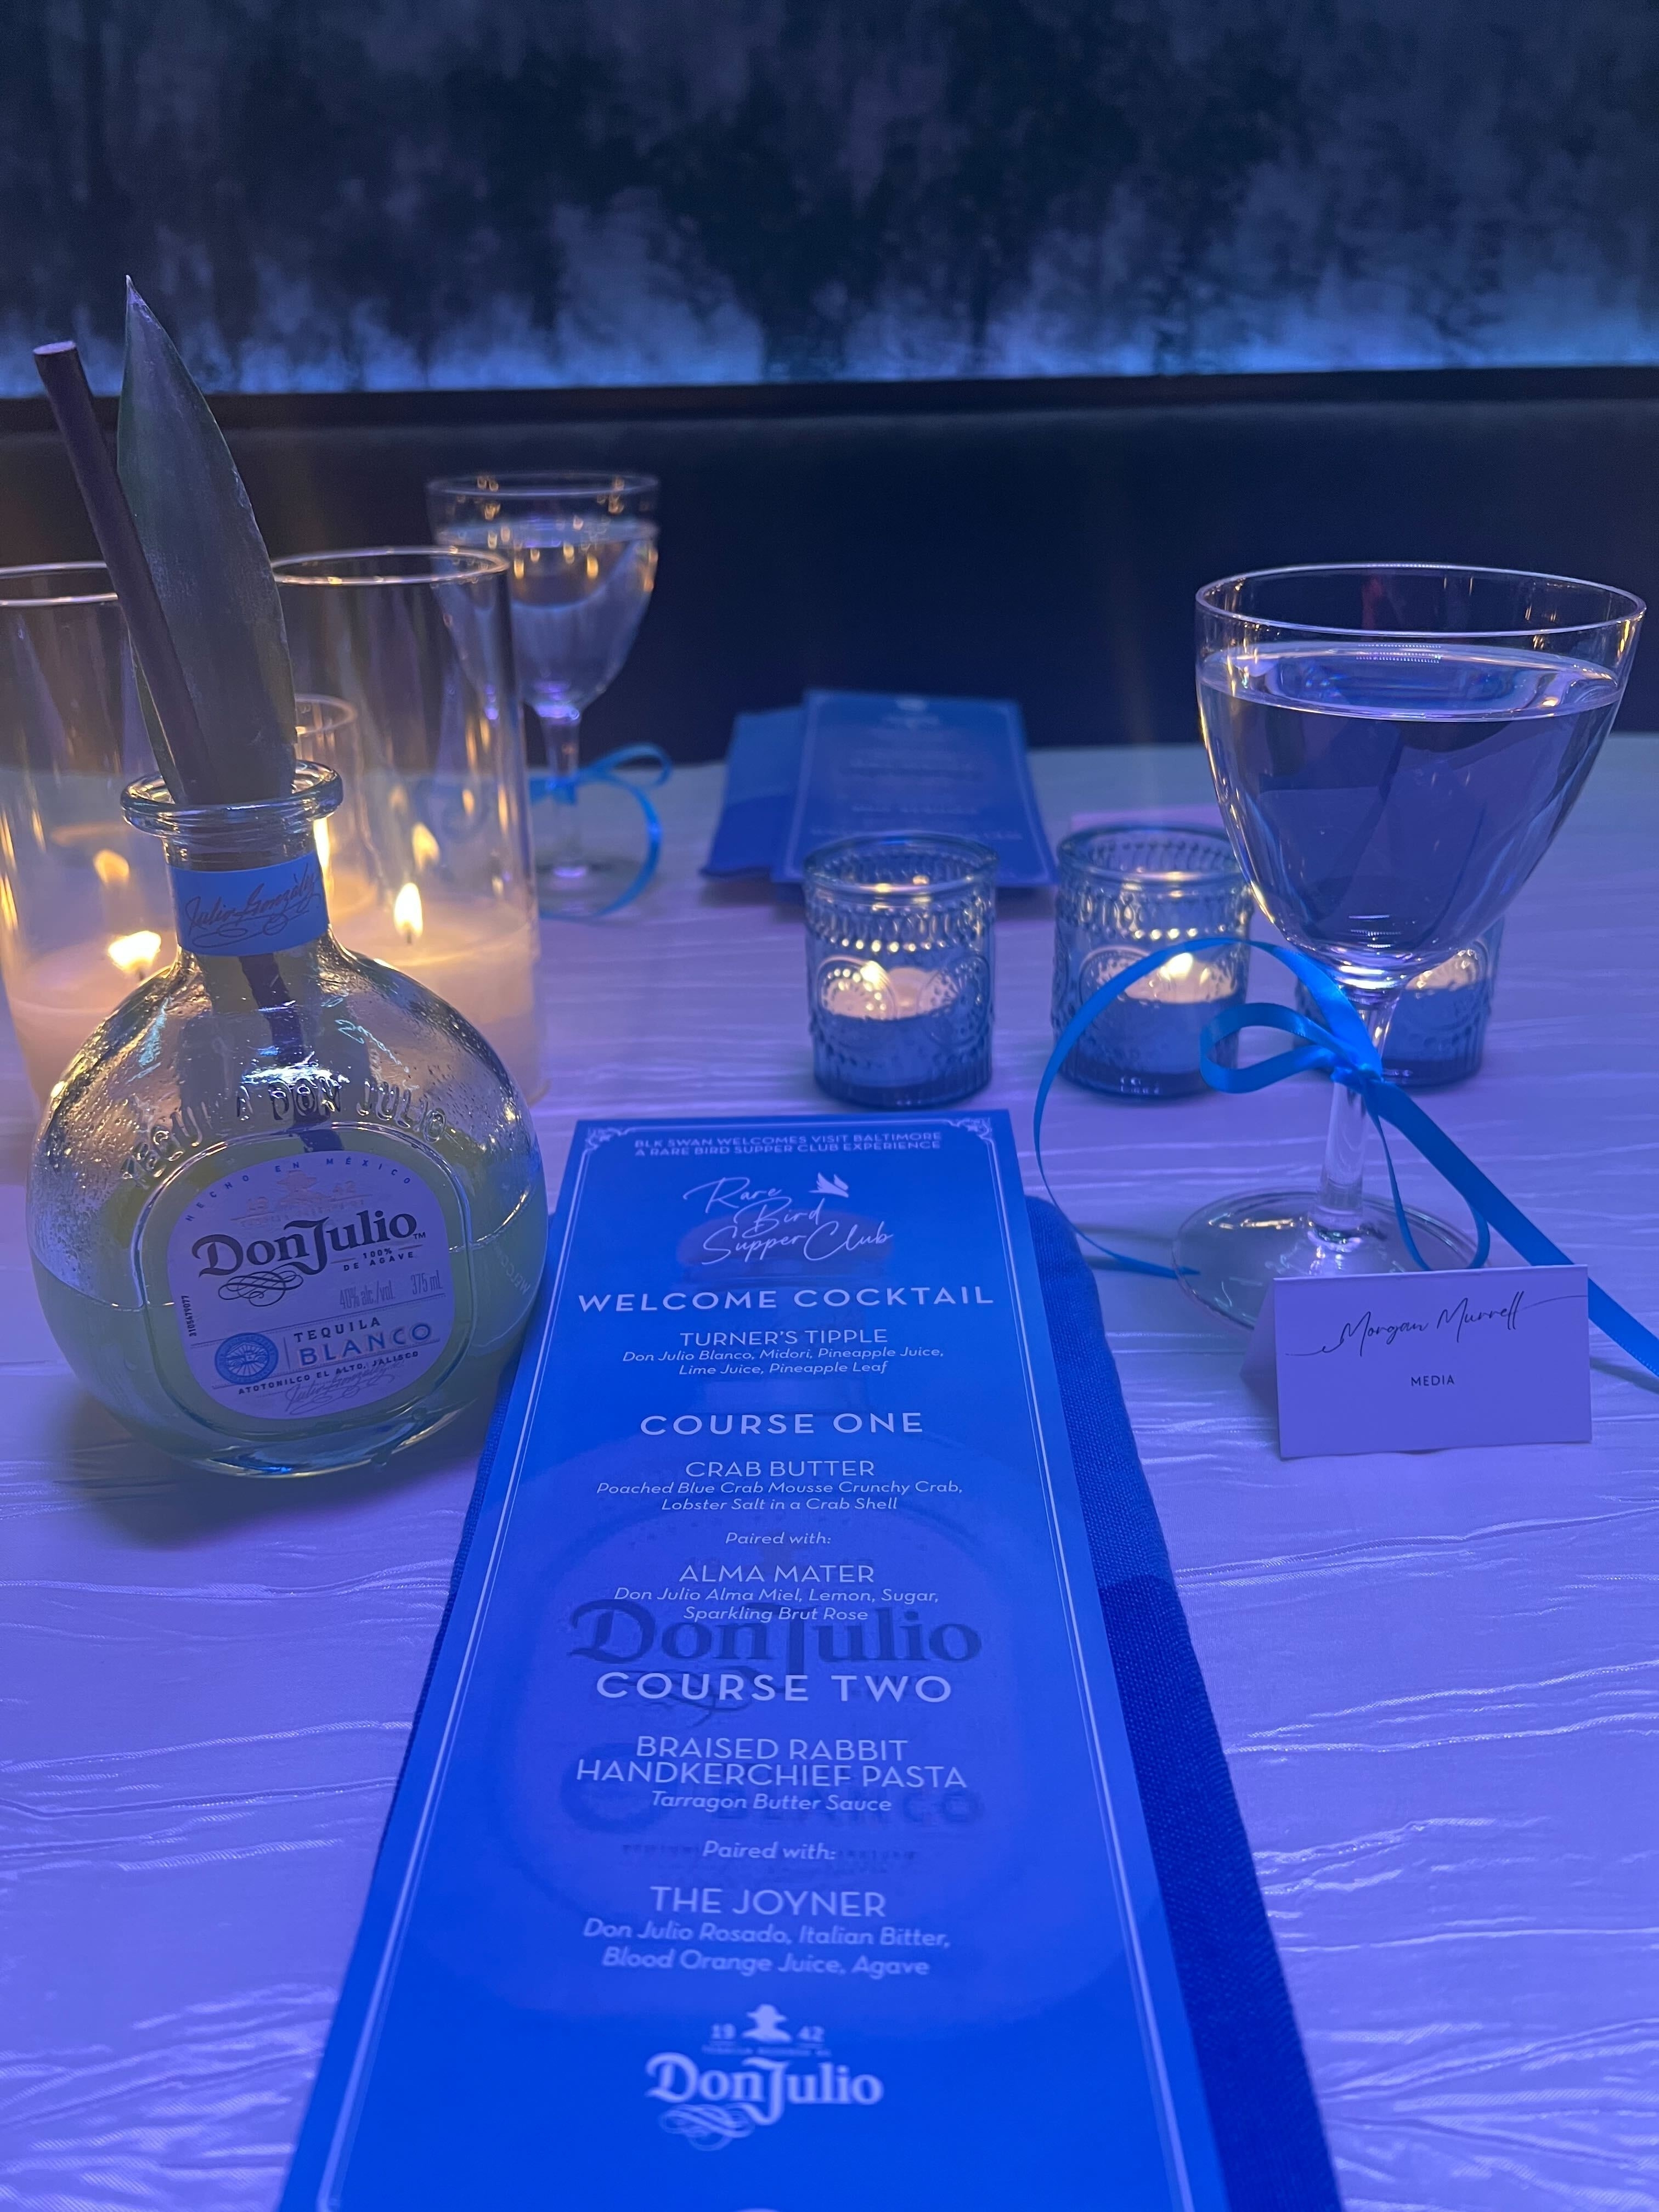 Bottle of Don Julio and a welcome cocktail menu on a table with a place card